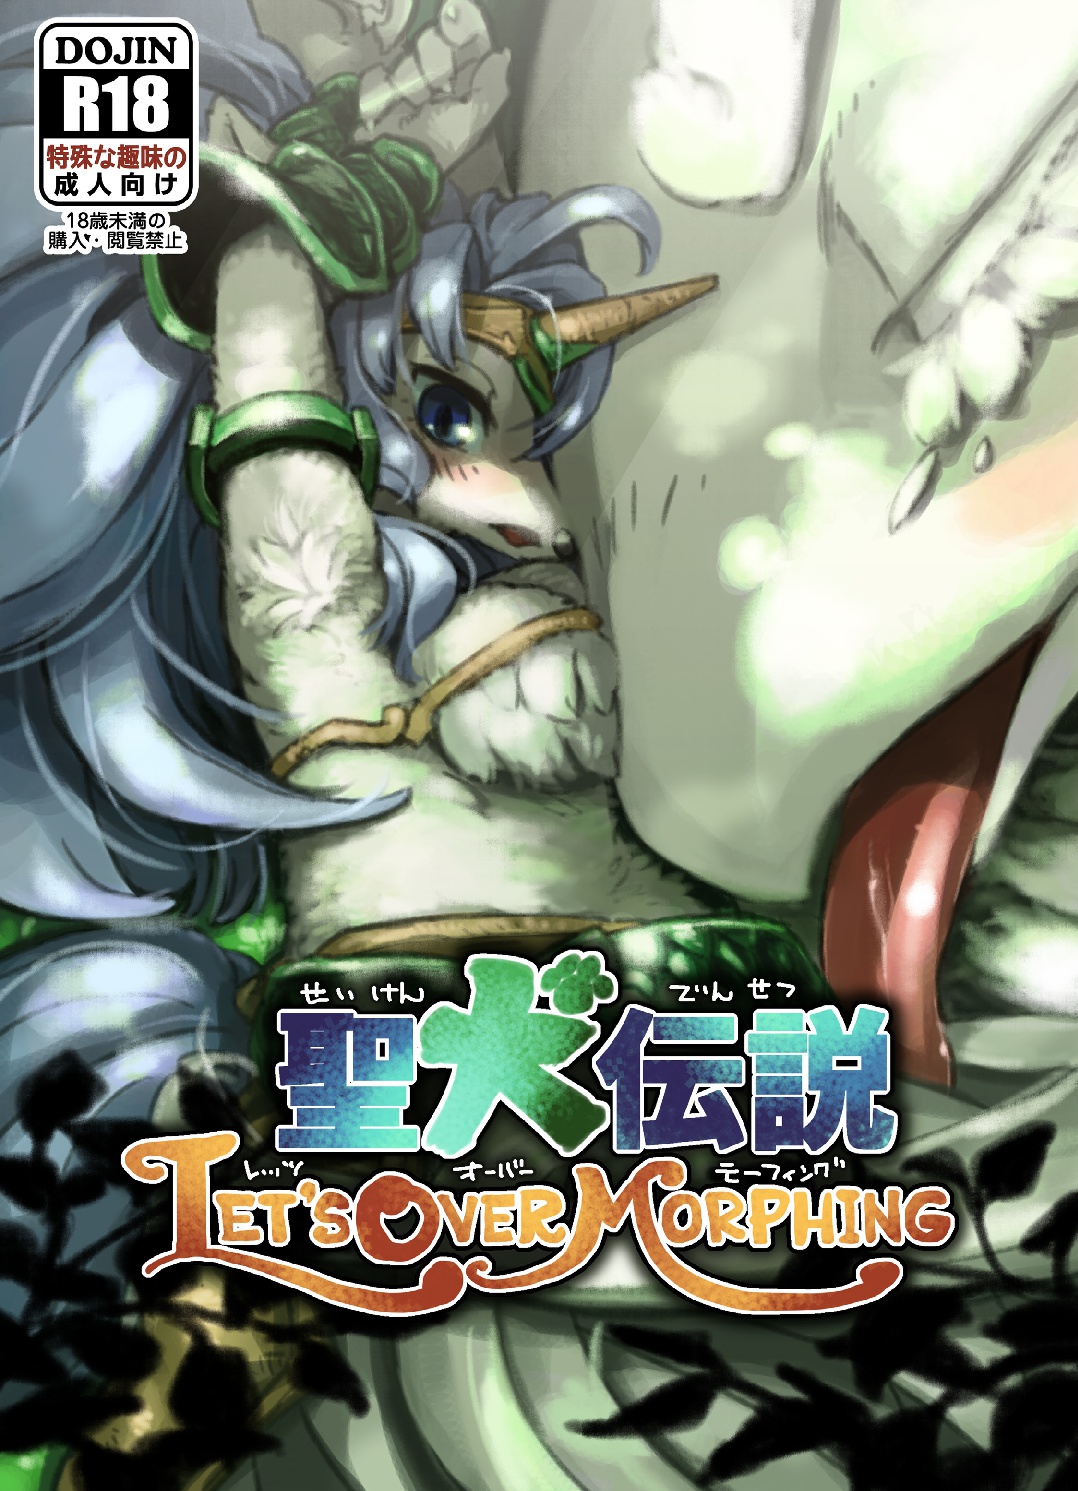 [BLUE MaRL (Kuromame)] Legend of the Sacred Dog - LET'S OVER MORPHING [BLUE MaRL (クロマメ)] 聖犬伝説 LET'S OVER MORPHING